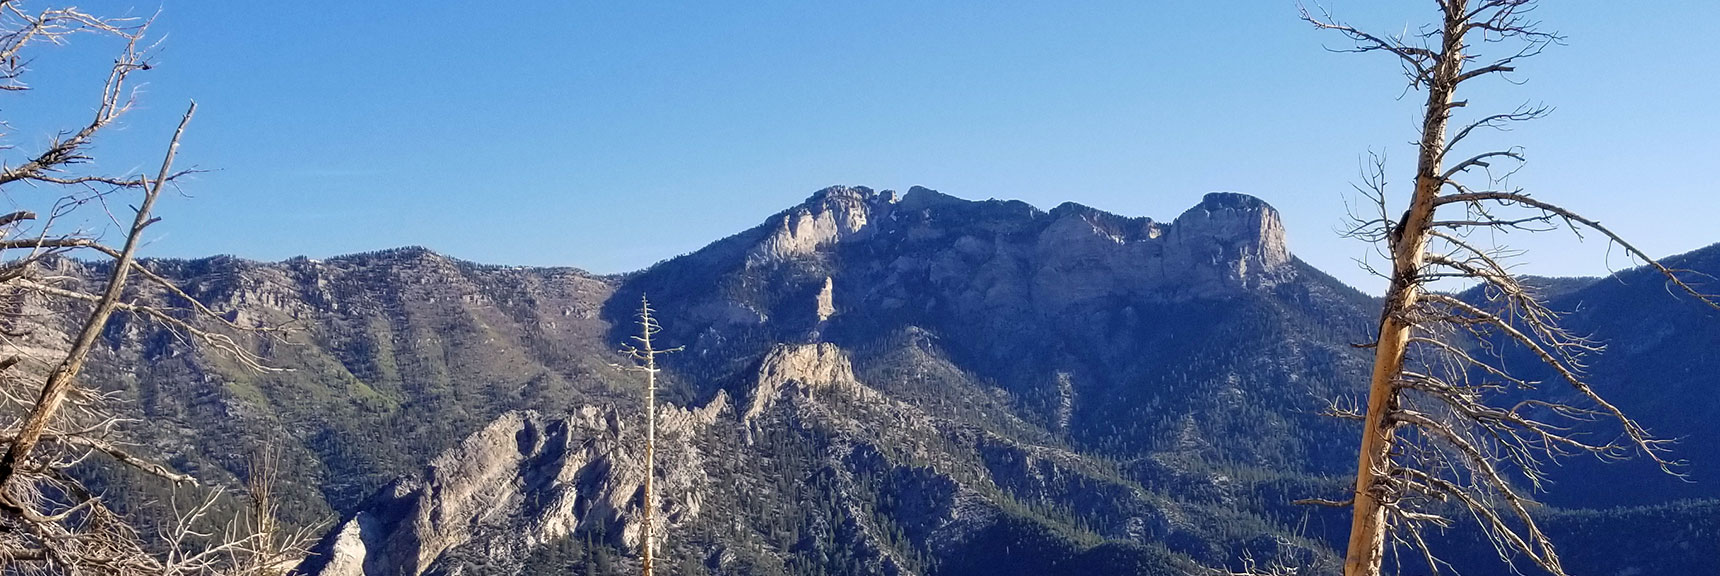 Mummy Mt. and Approach Viewed from South Climb Trail